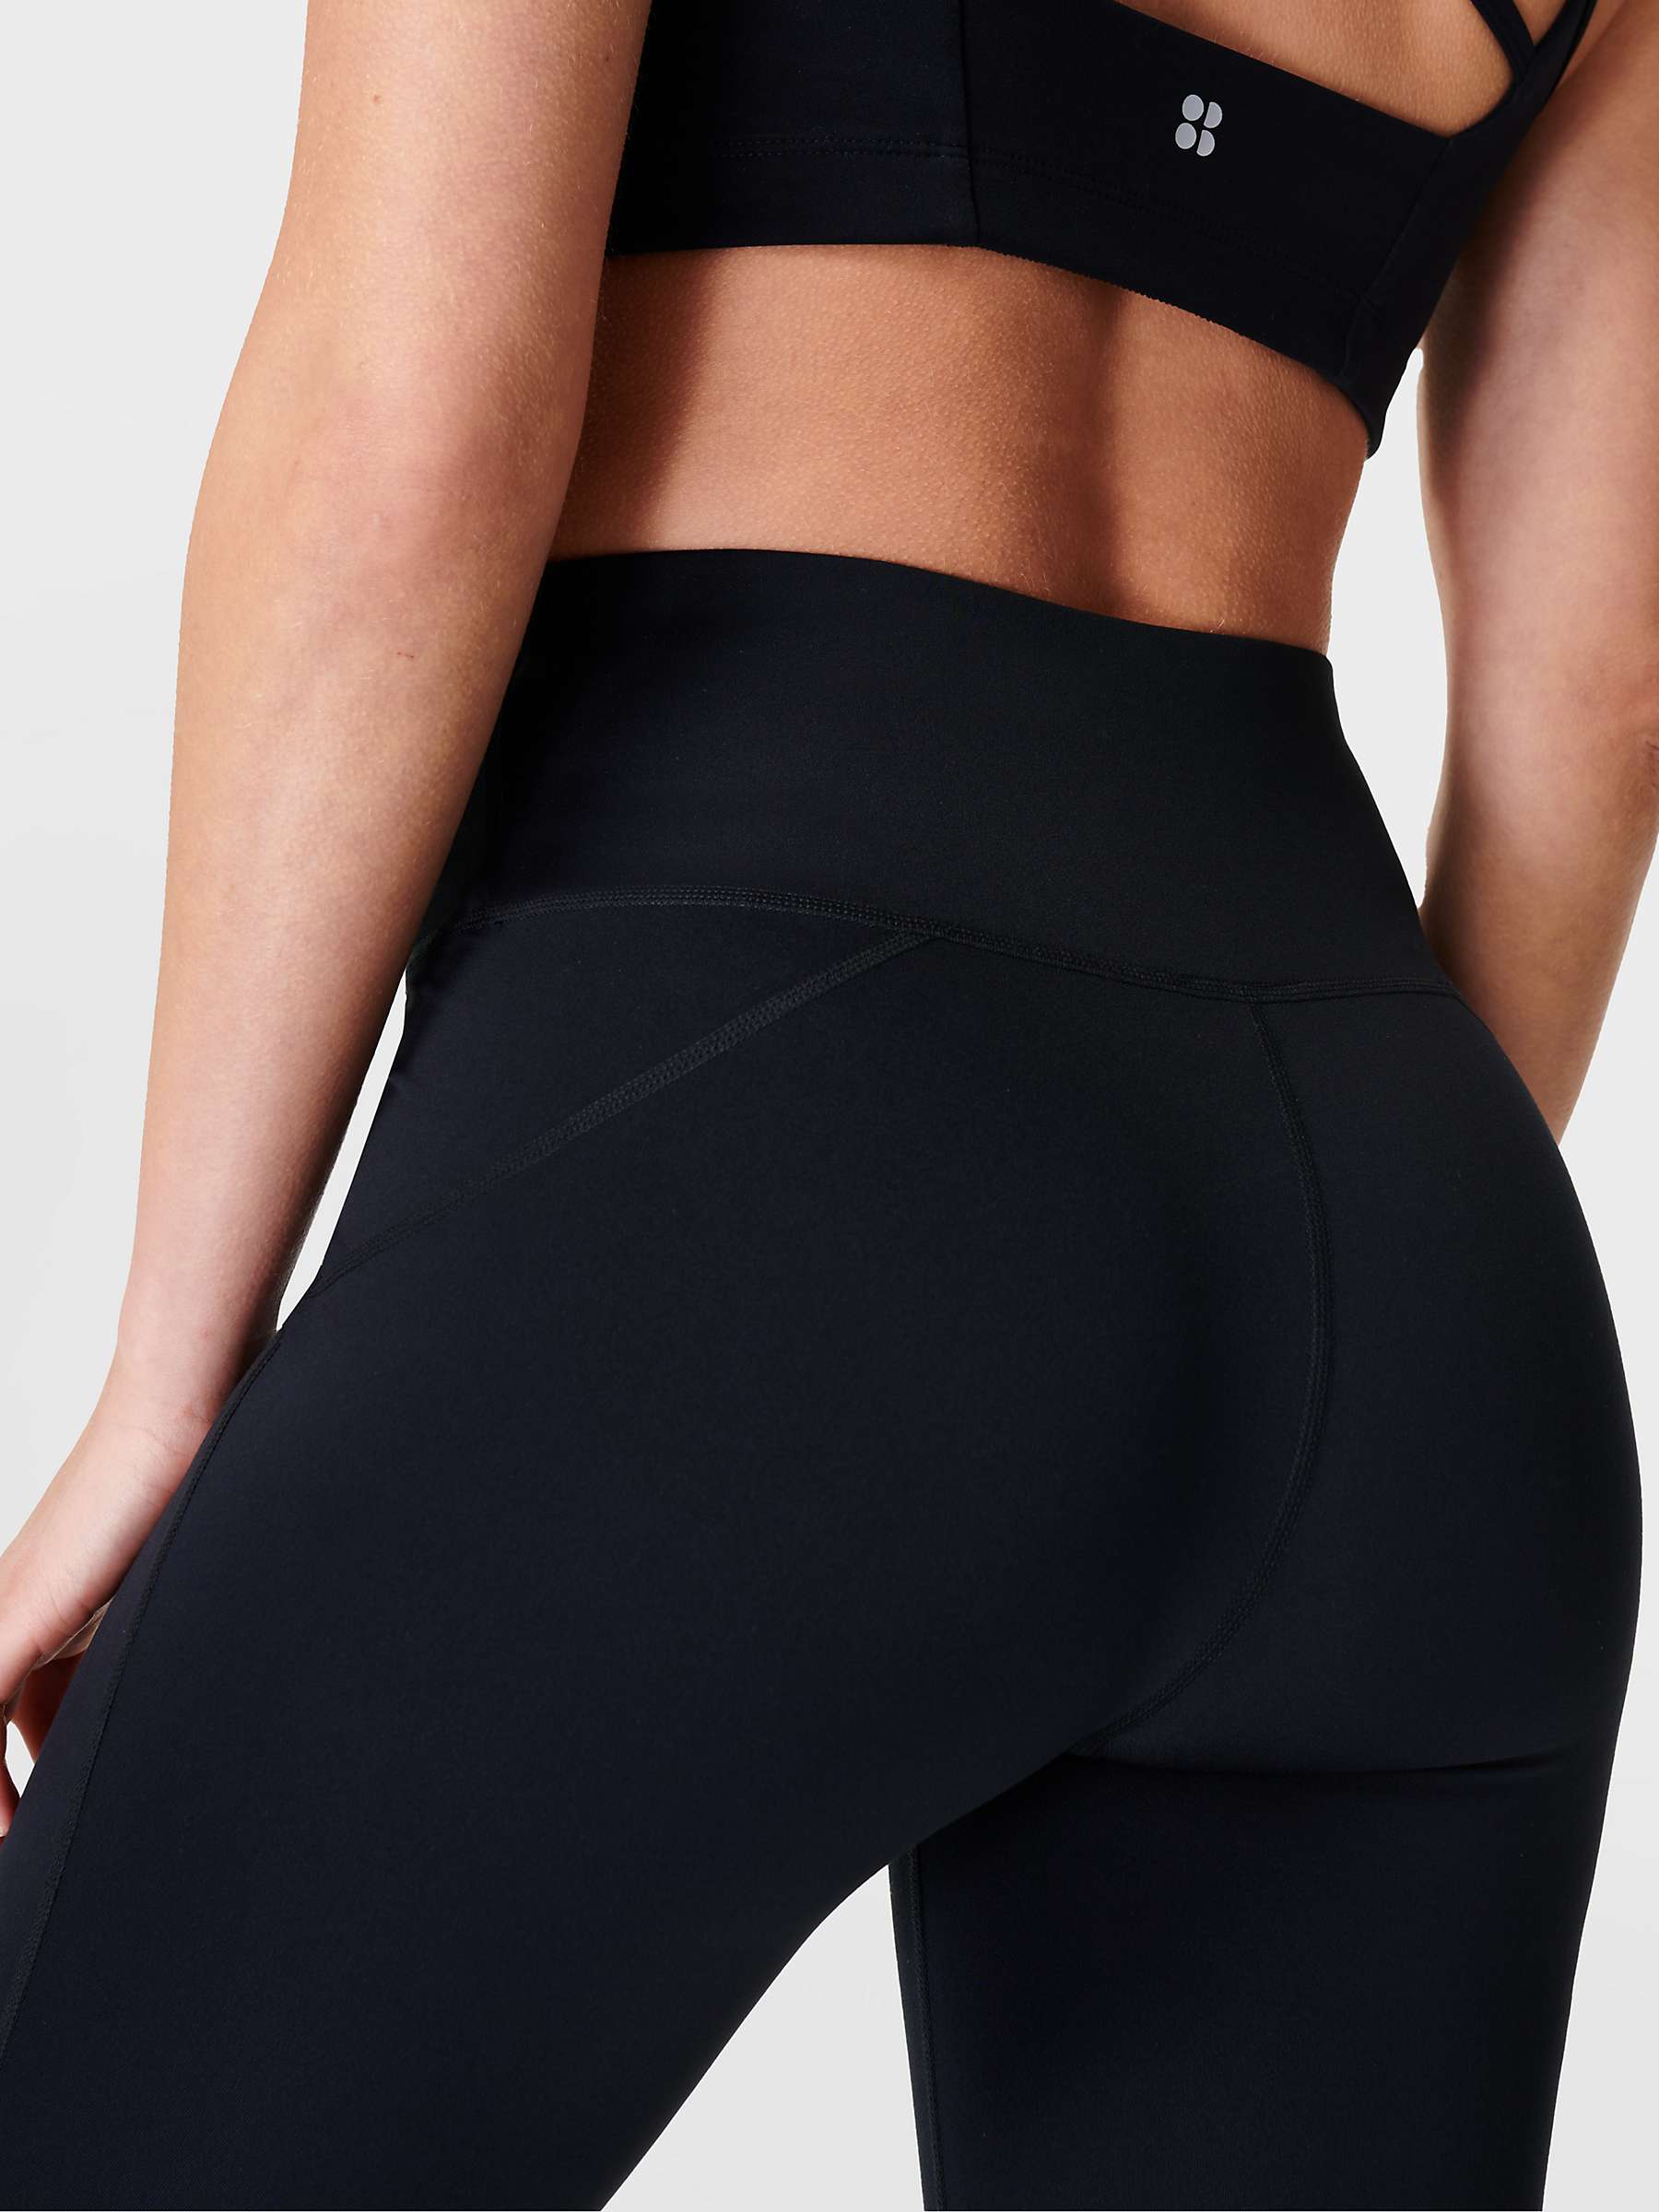 Buy Sweaty Betty All Day 7/8 Gym Leggings Online at johnlewis.com